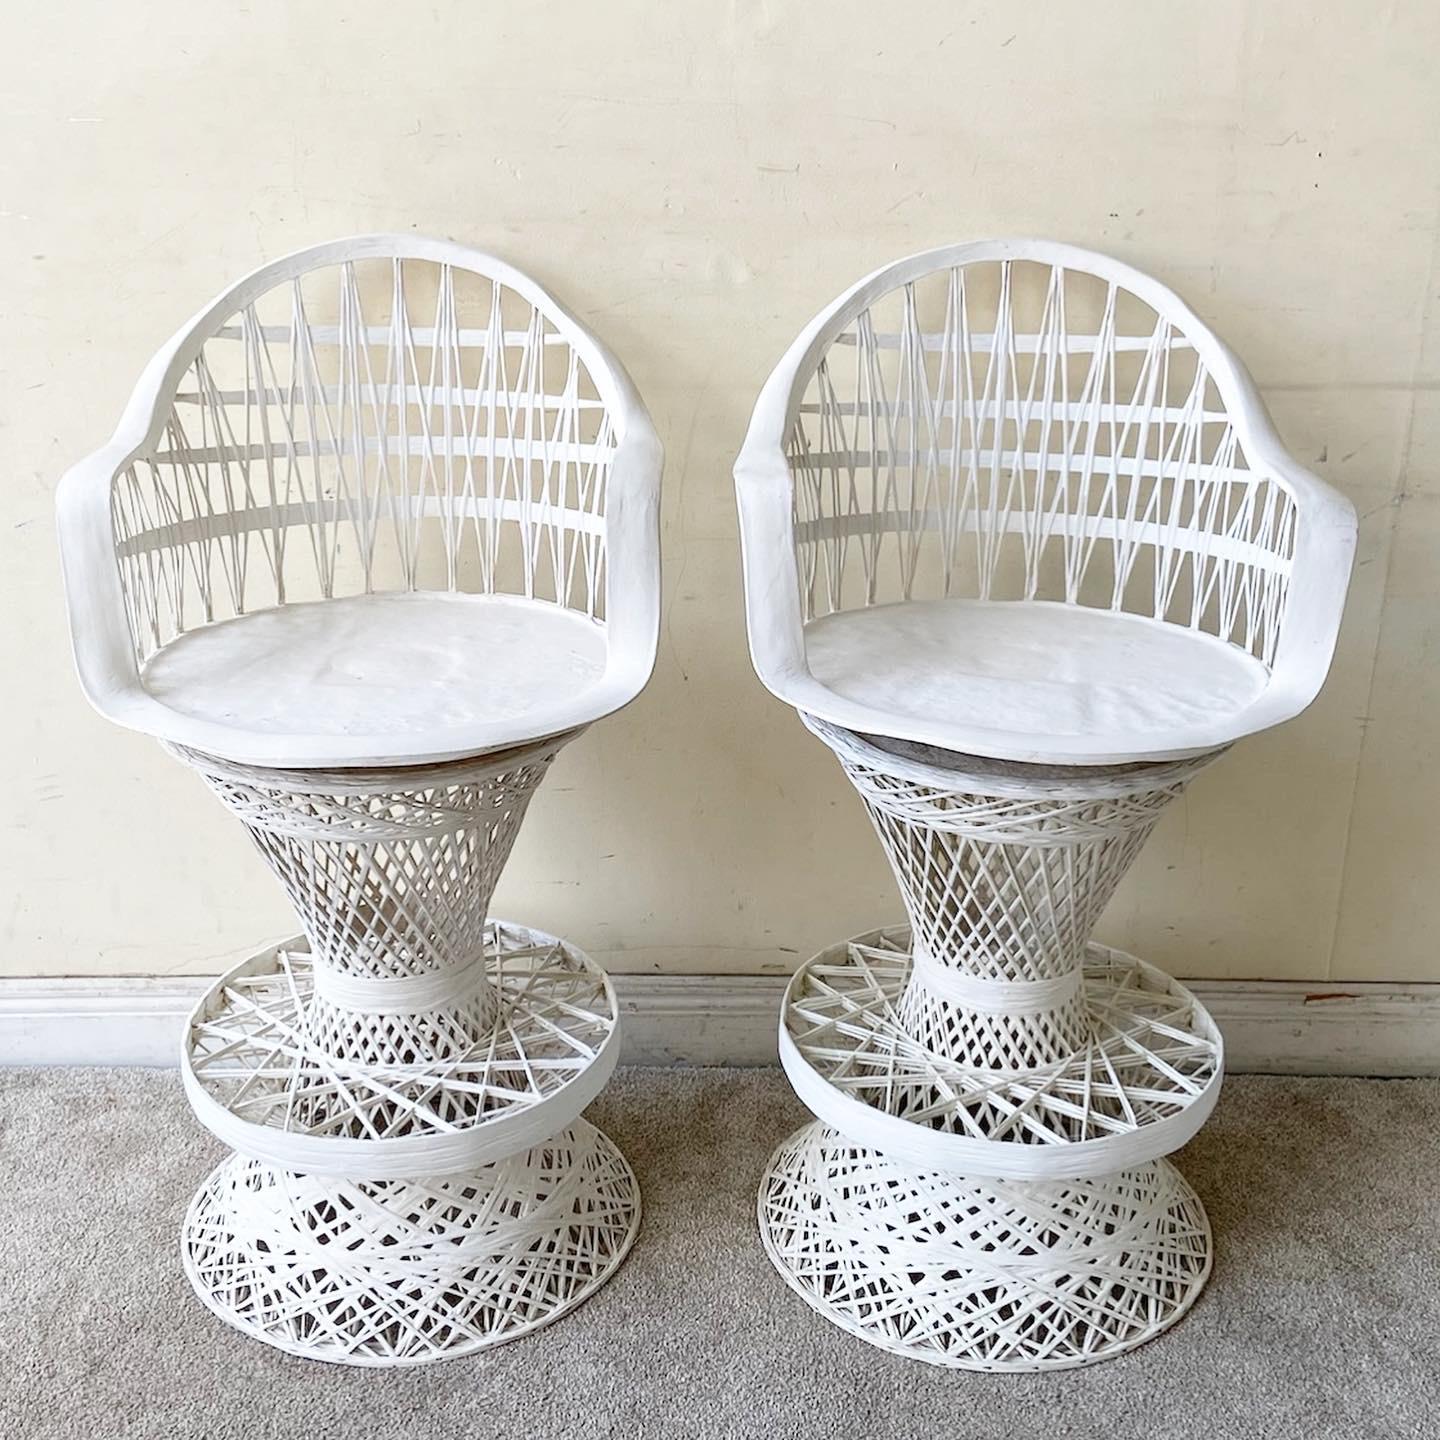 Exceptional set of 4 Mid-Century Modern spun fiberglass Russell Woodard stools. Each feature a woven frame with a white finish and swivel top.